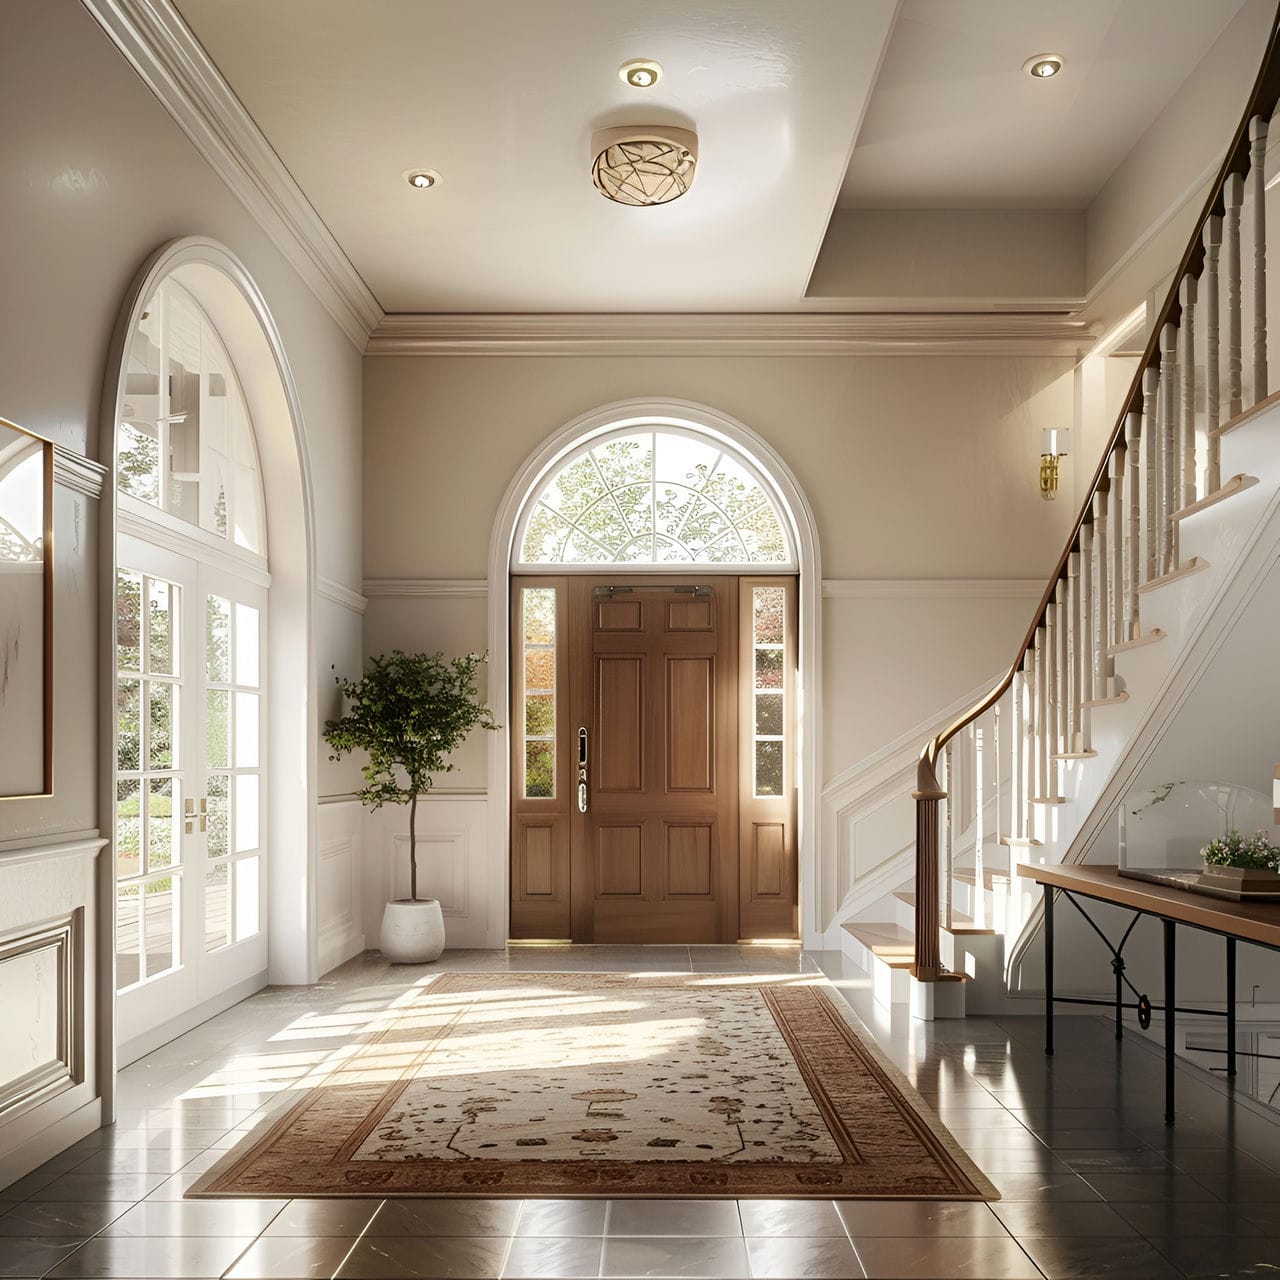 Foyer: size, functionality, uses, furniture, and renovation